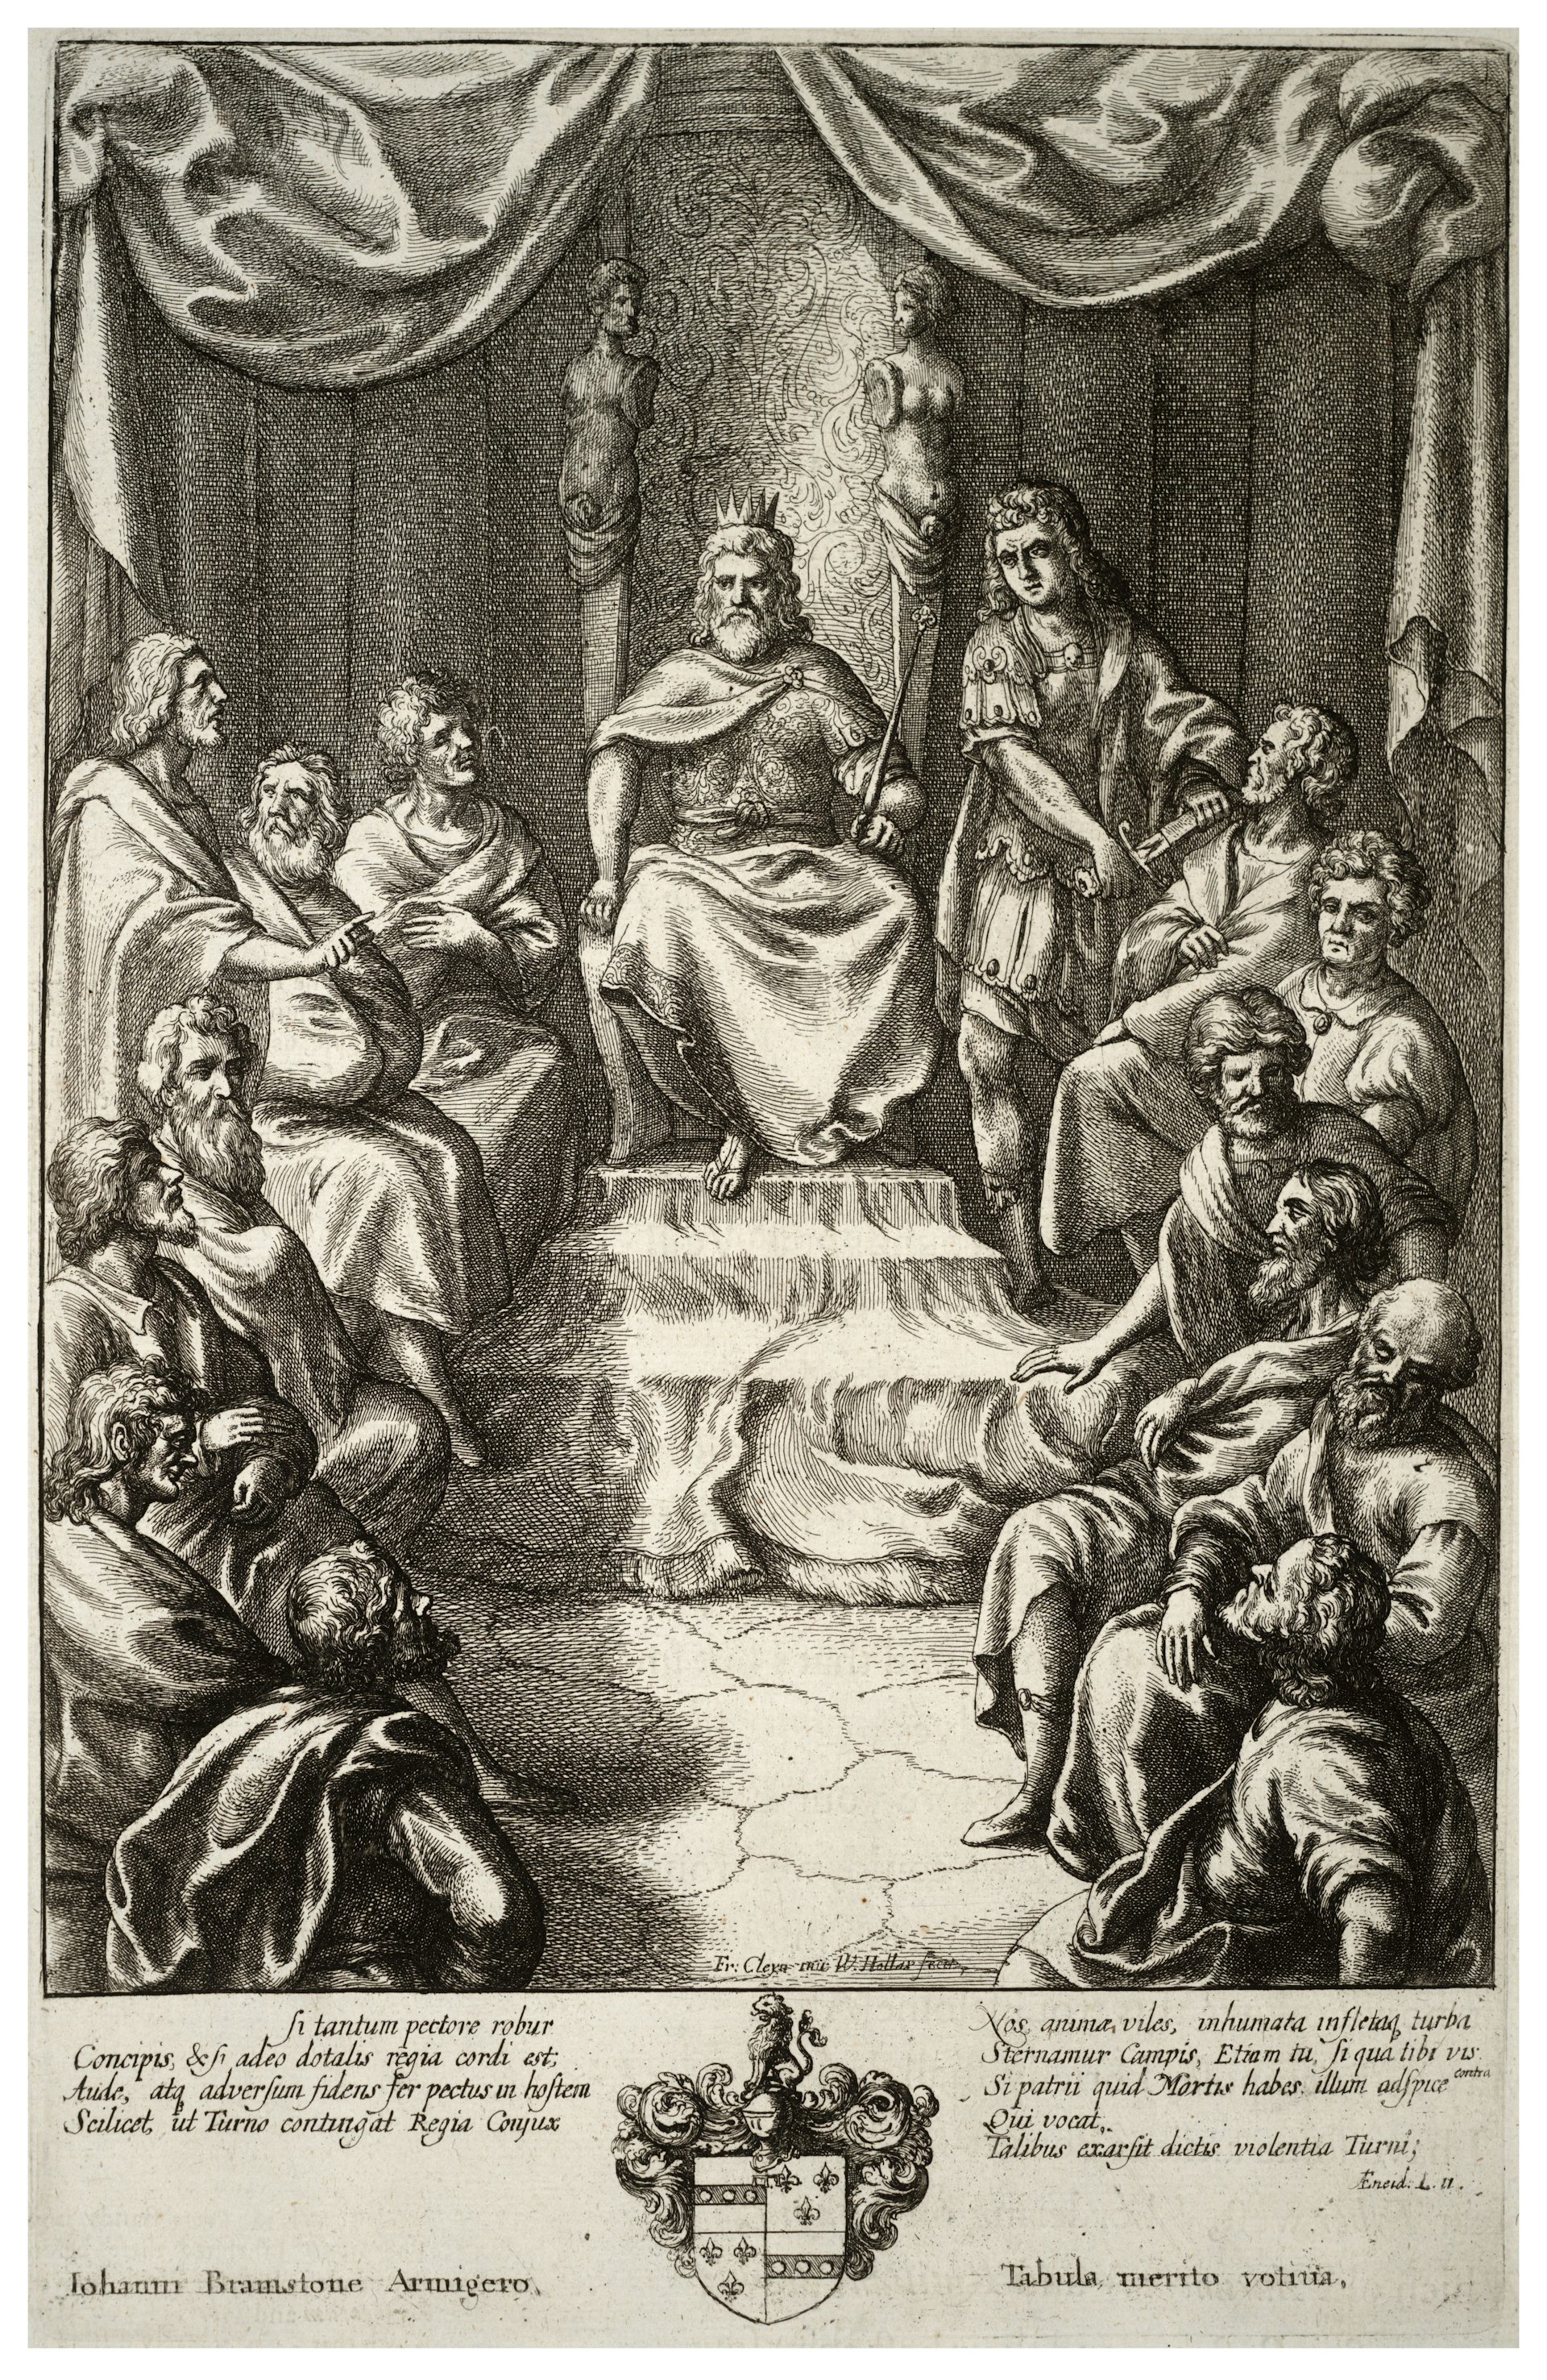 King Latinus in Council by Wenceslas Hollar